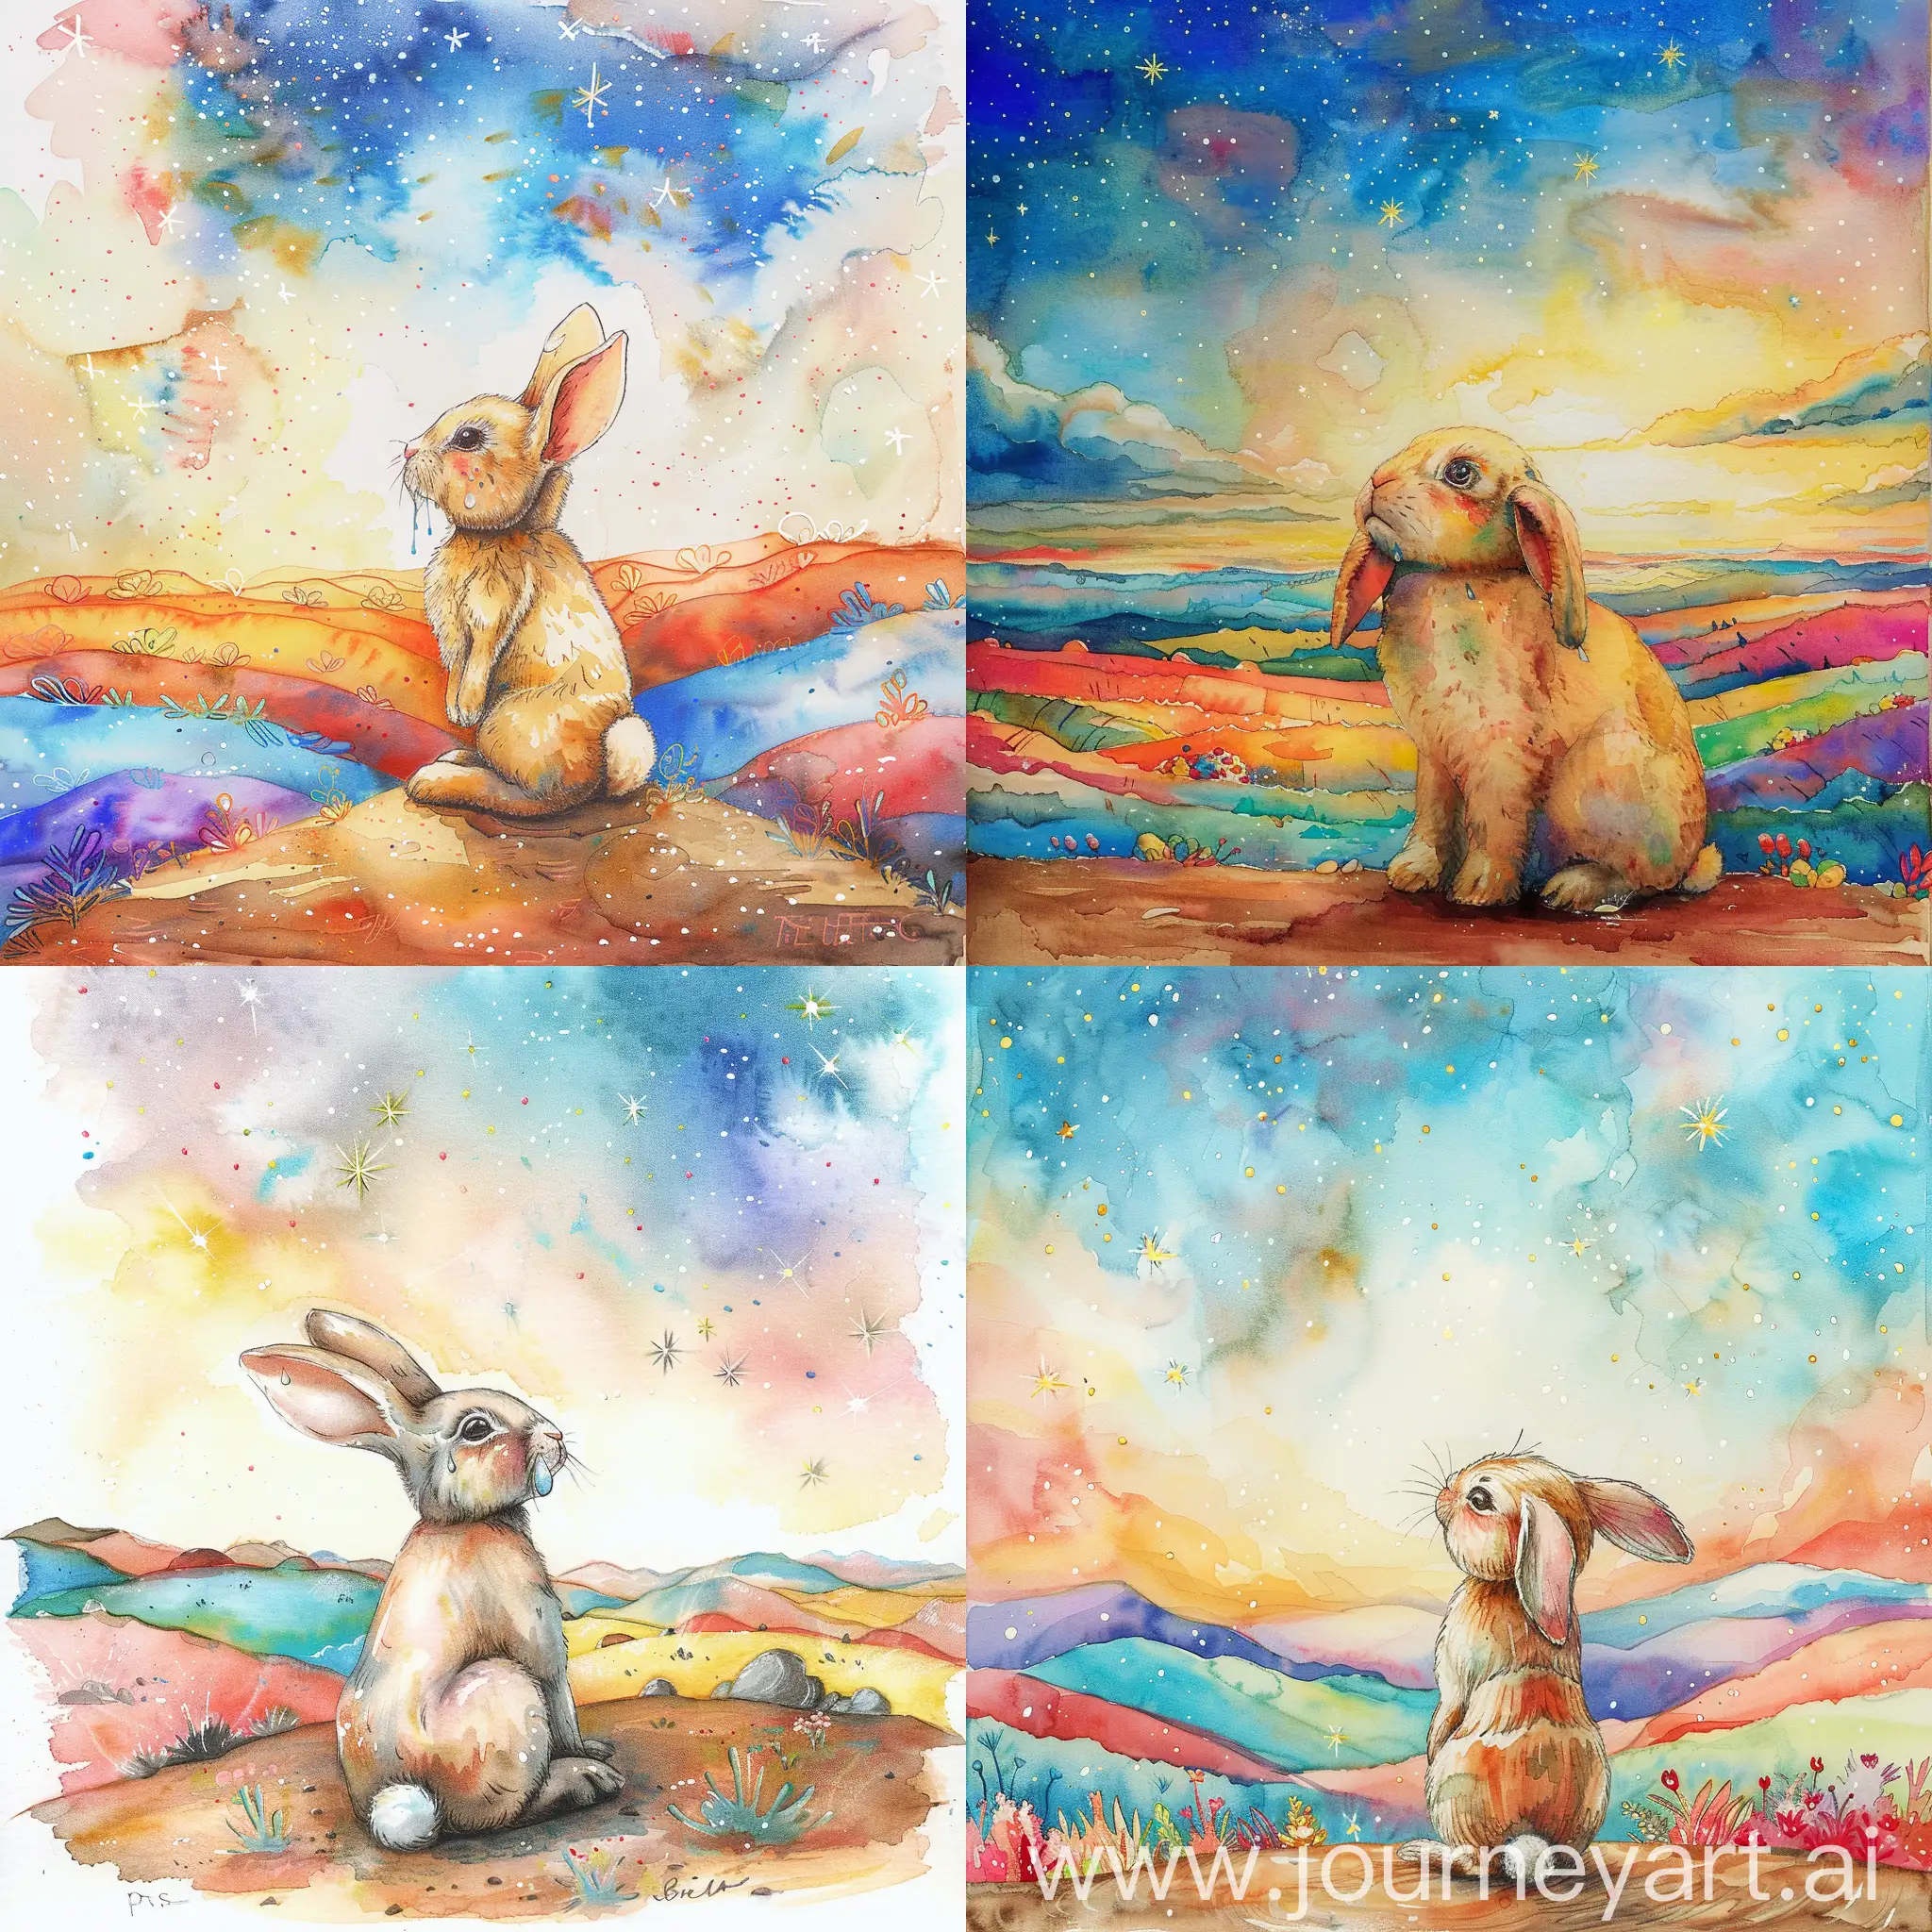 Young little rabbit, tearful, alone, looking up at the sky in the distance, watercolor painting, bright stars, surrounded by colorful landscape, side view, rear view